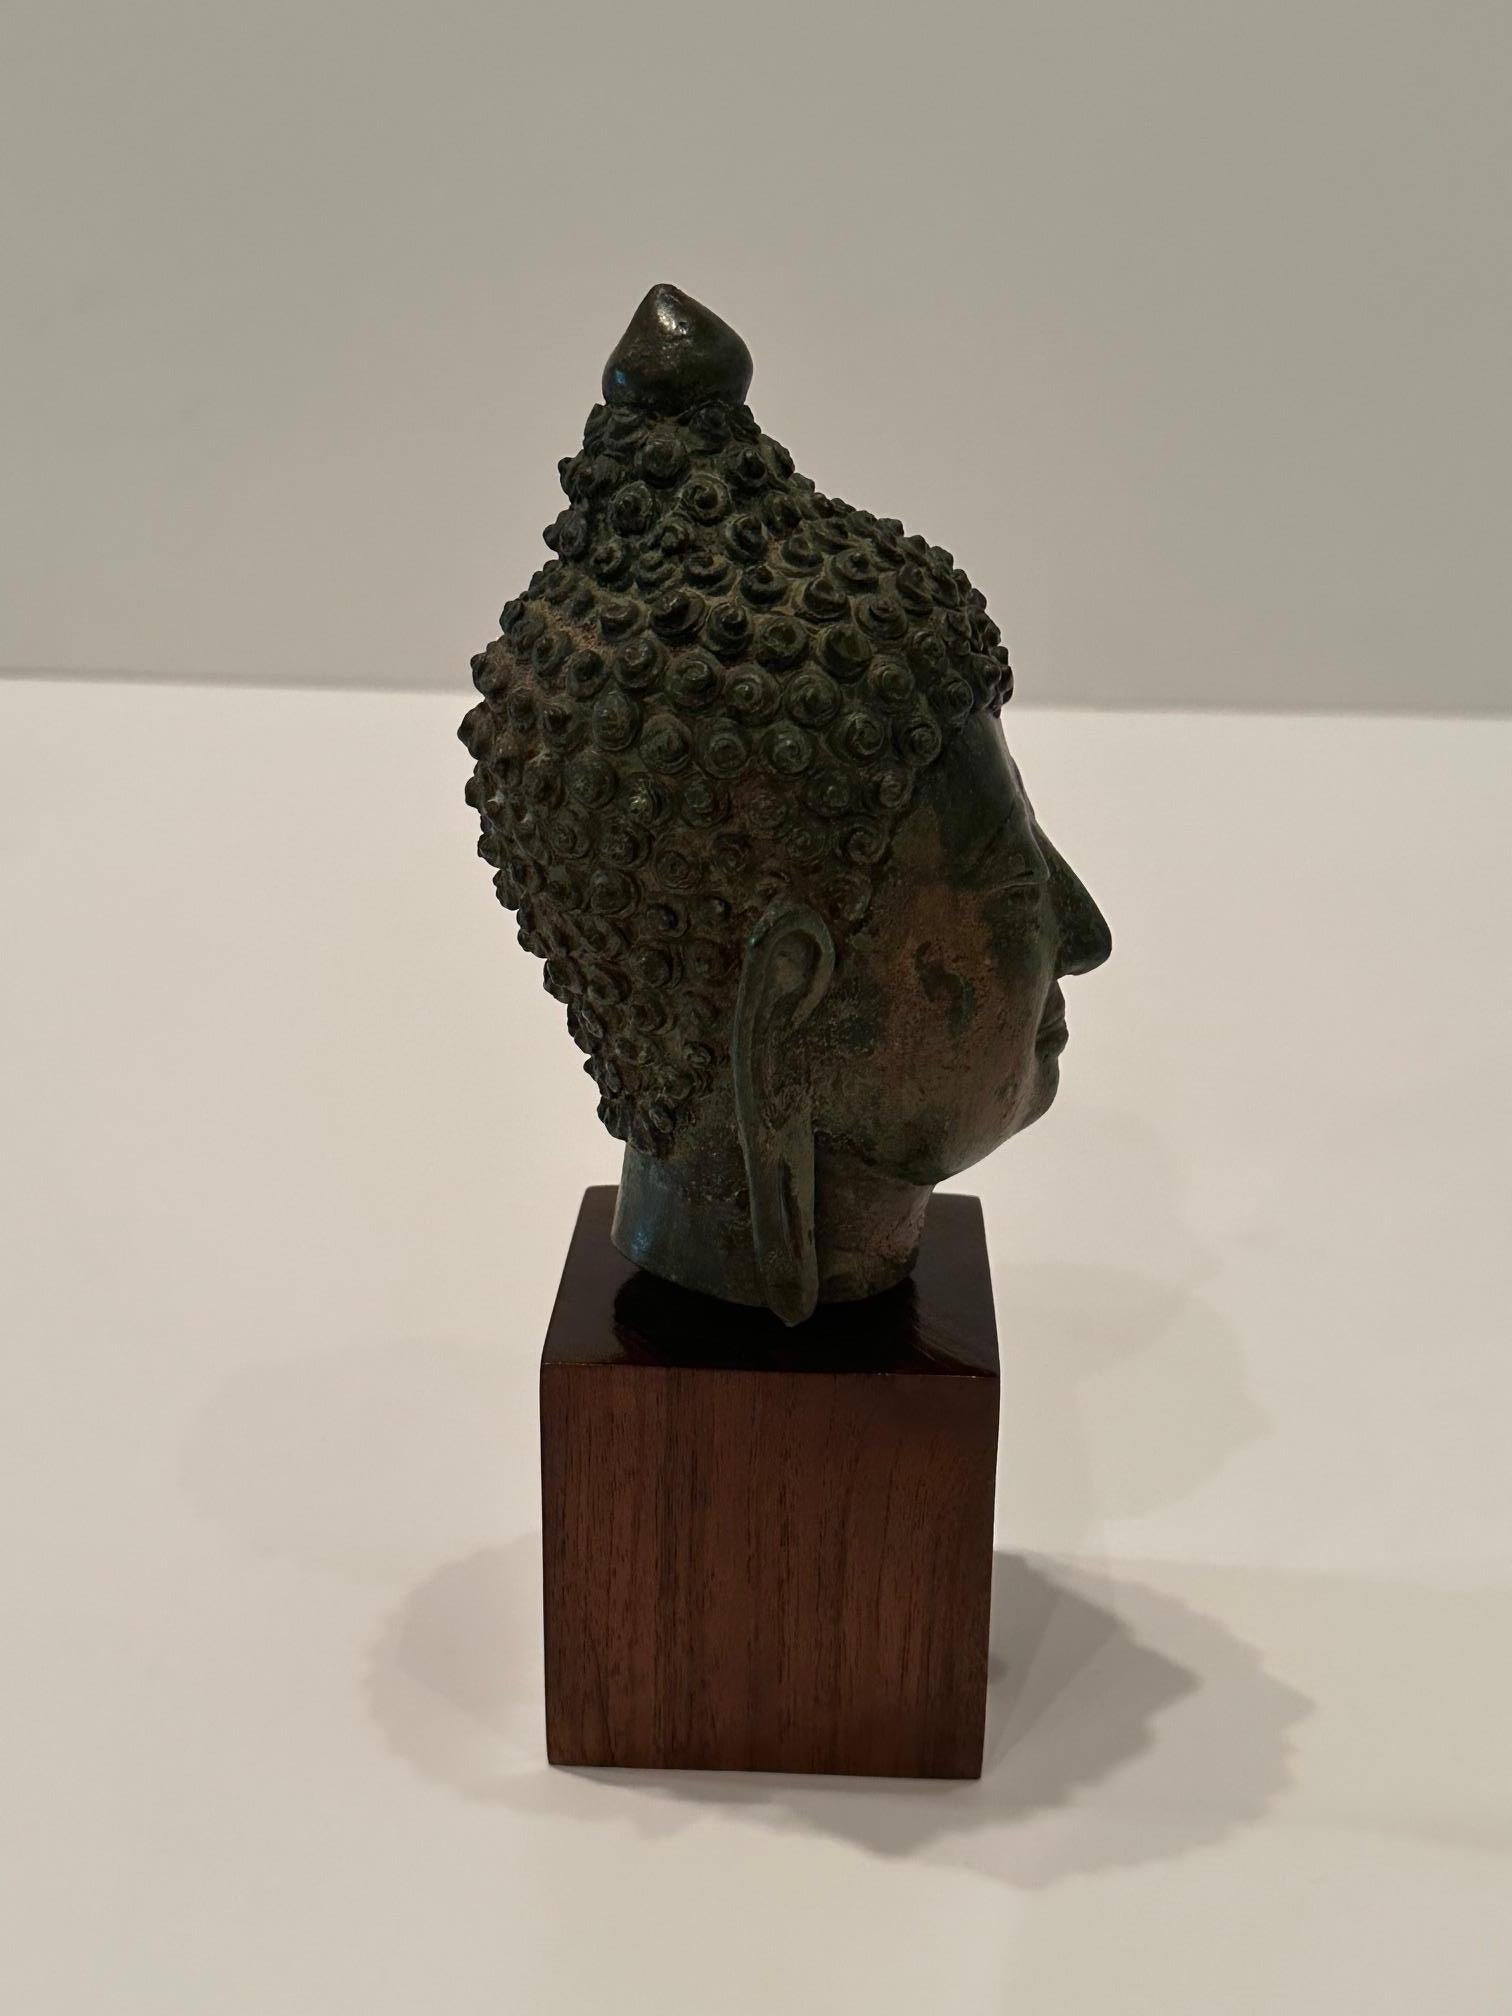 Ethereal Small Thai Bronze Buddha Head Sculpture For Sale 2